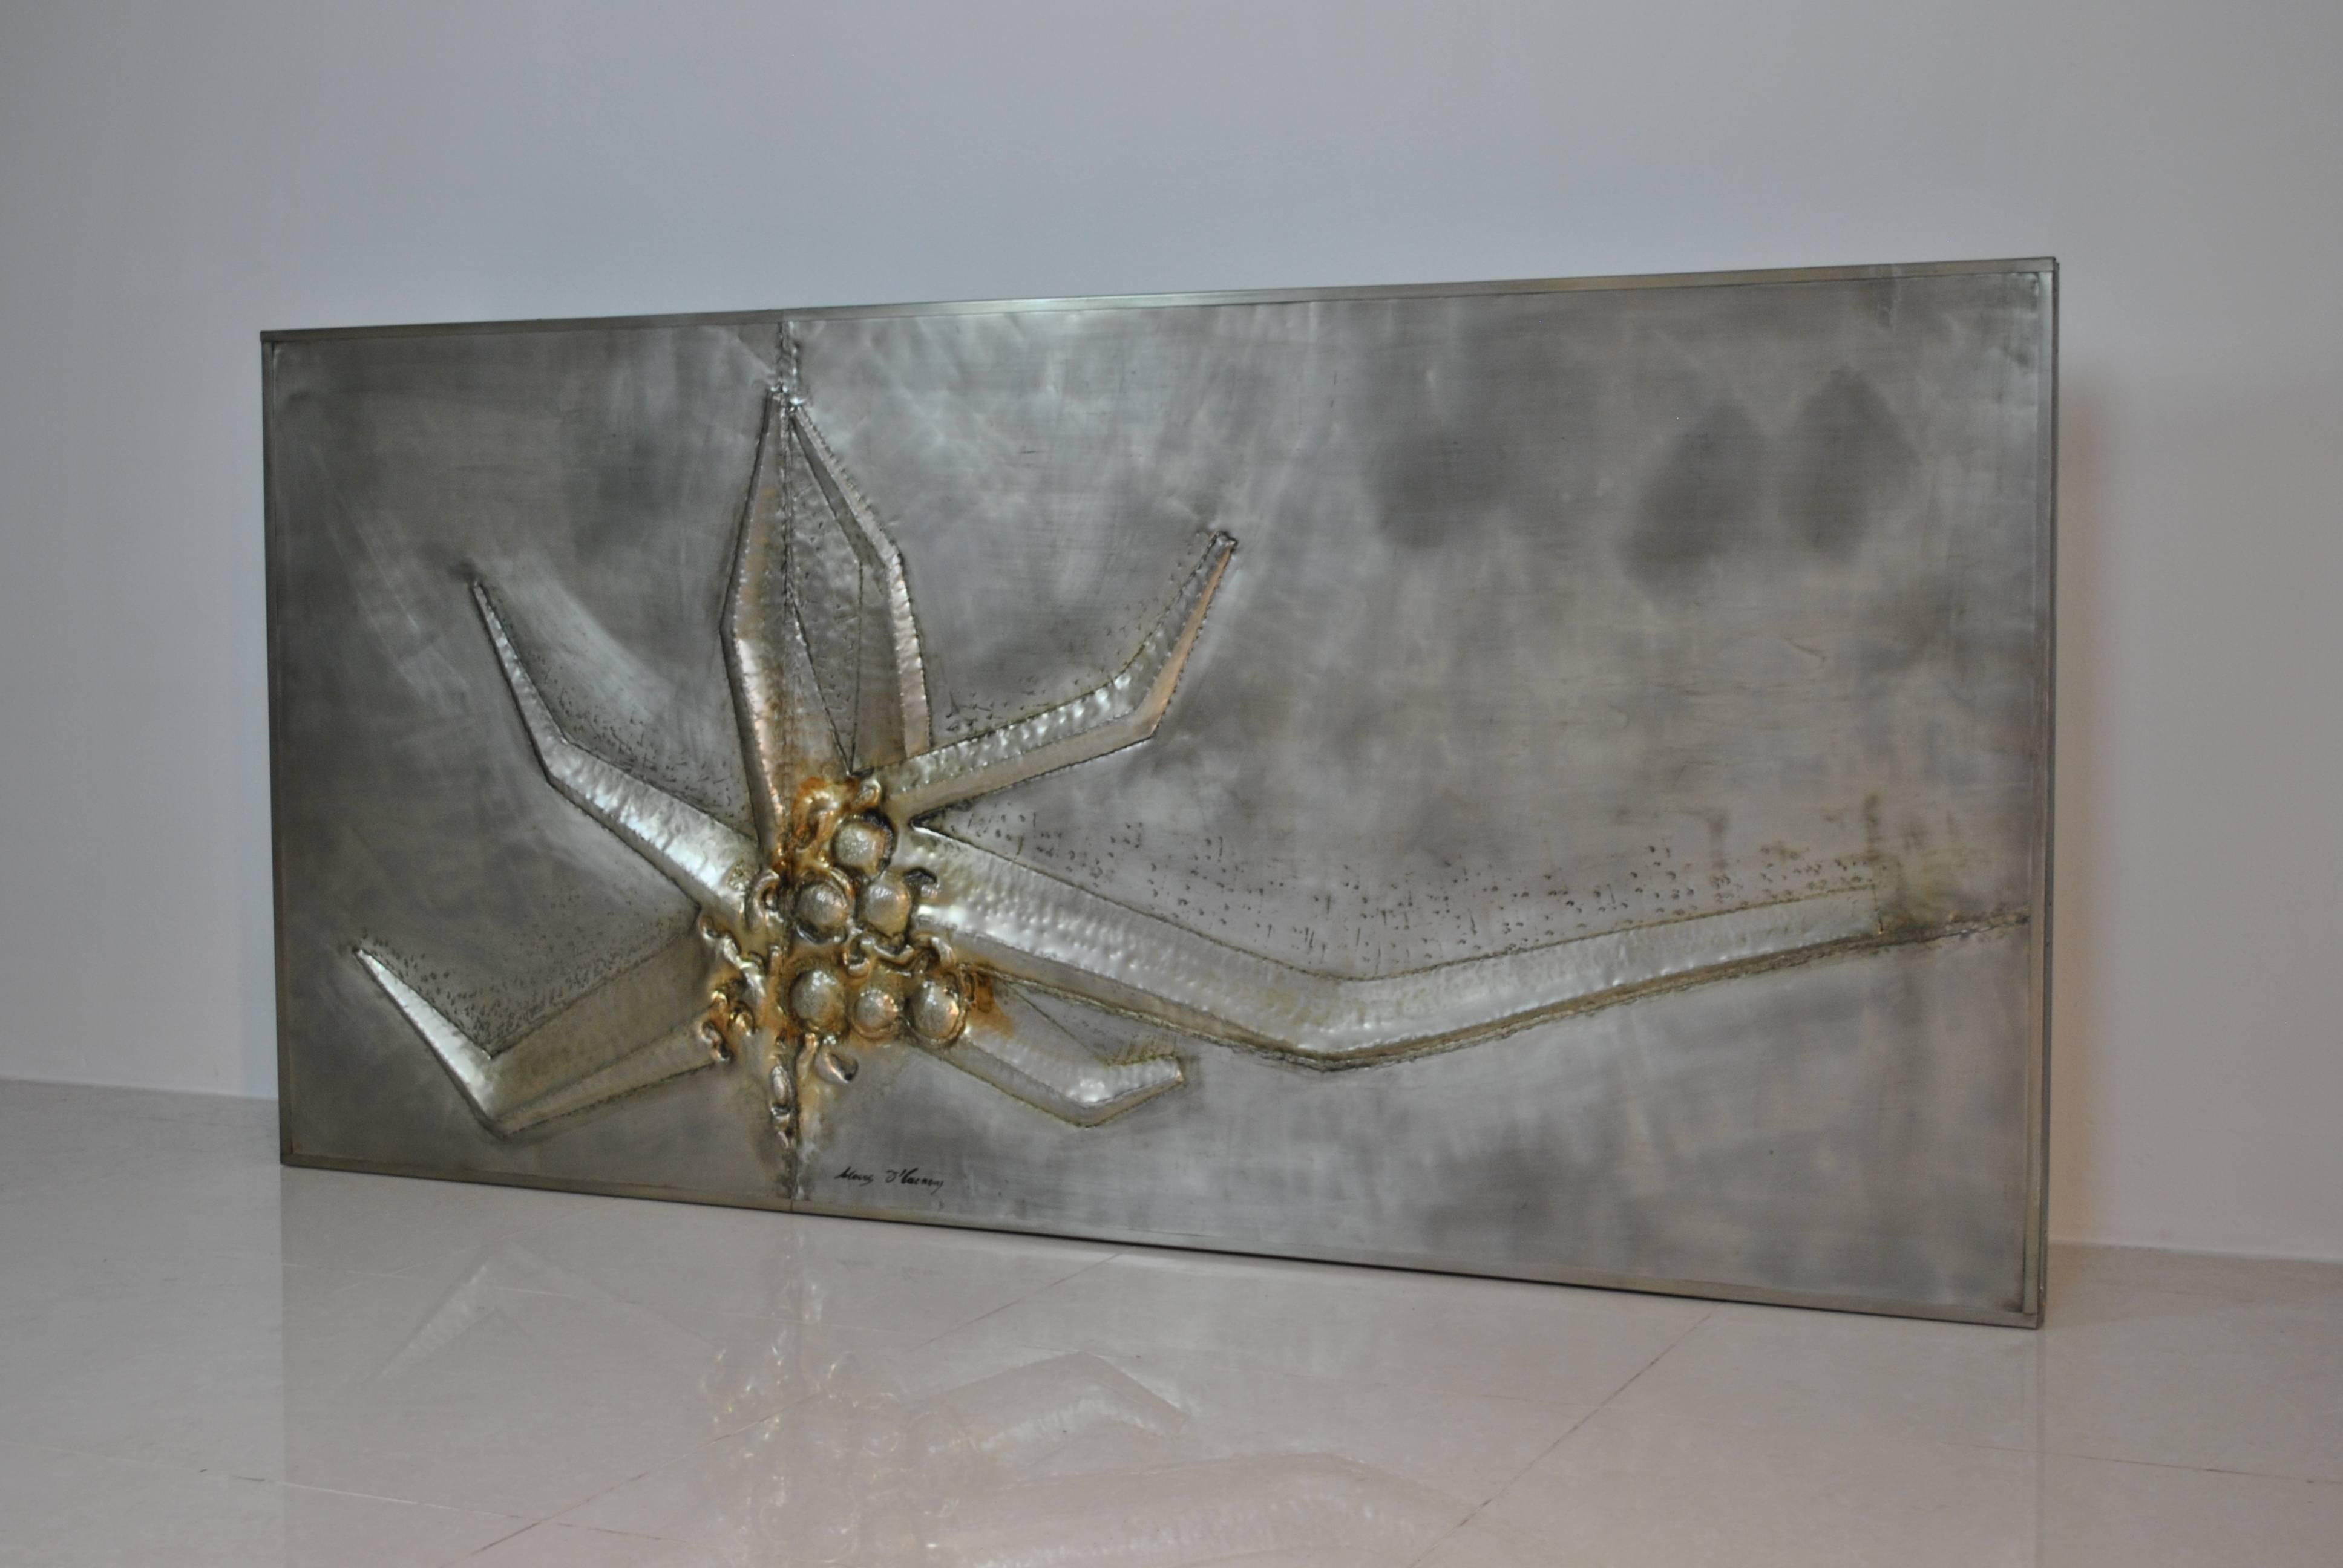 Hammered Important Brutalist Wall Sculpture by Marc D'Haenens, Belgium, 1970s For Sale